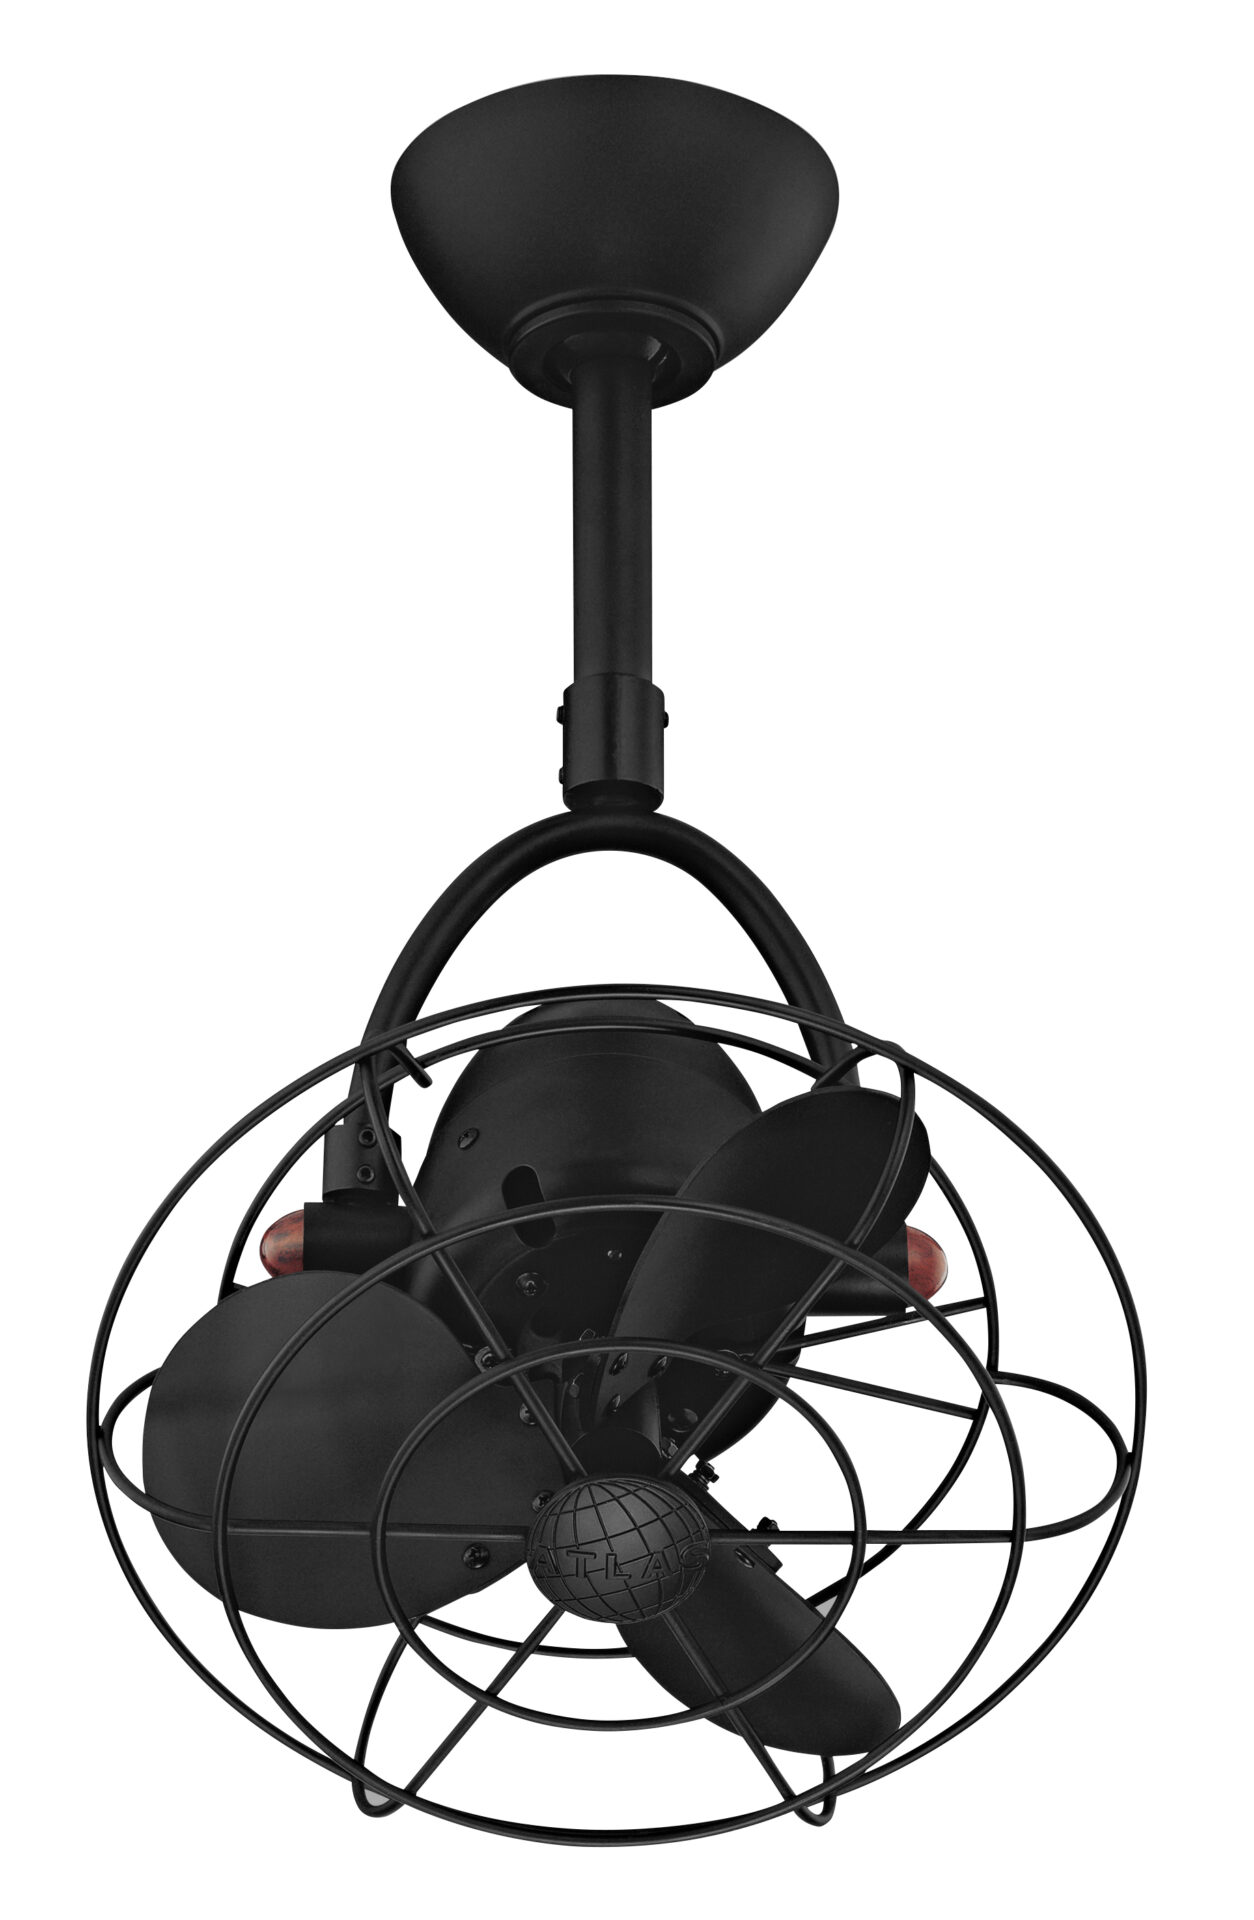 Diane ceiling fan in Matte Black with Metal blades in decorative cage manufactured by Matthews Fan Company.